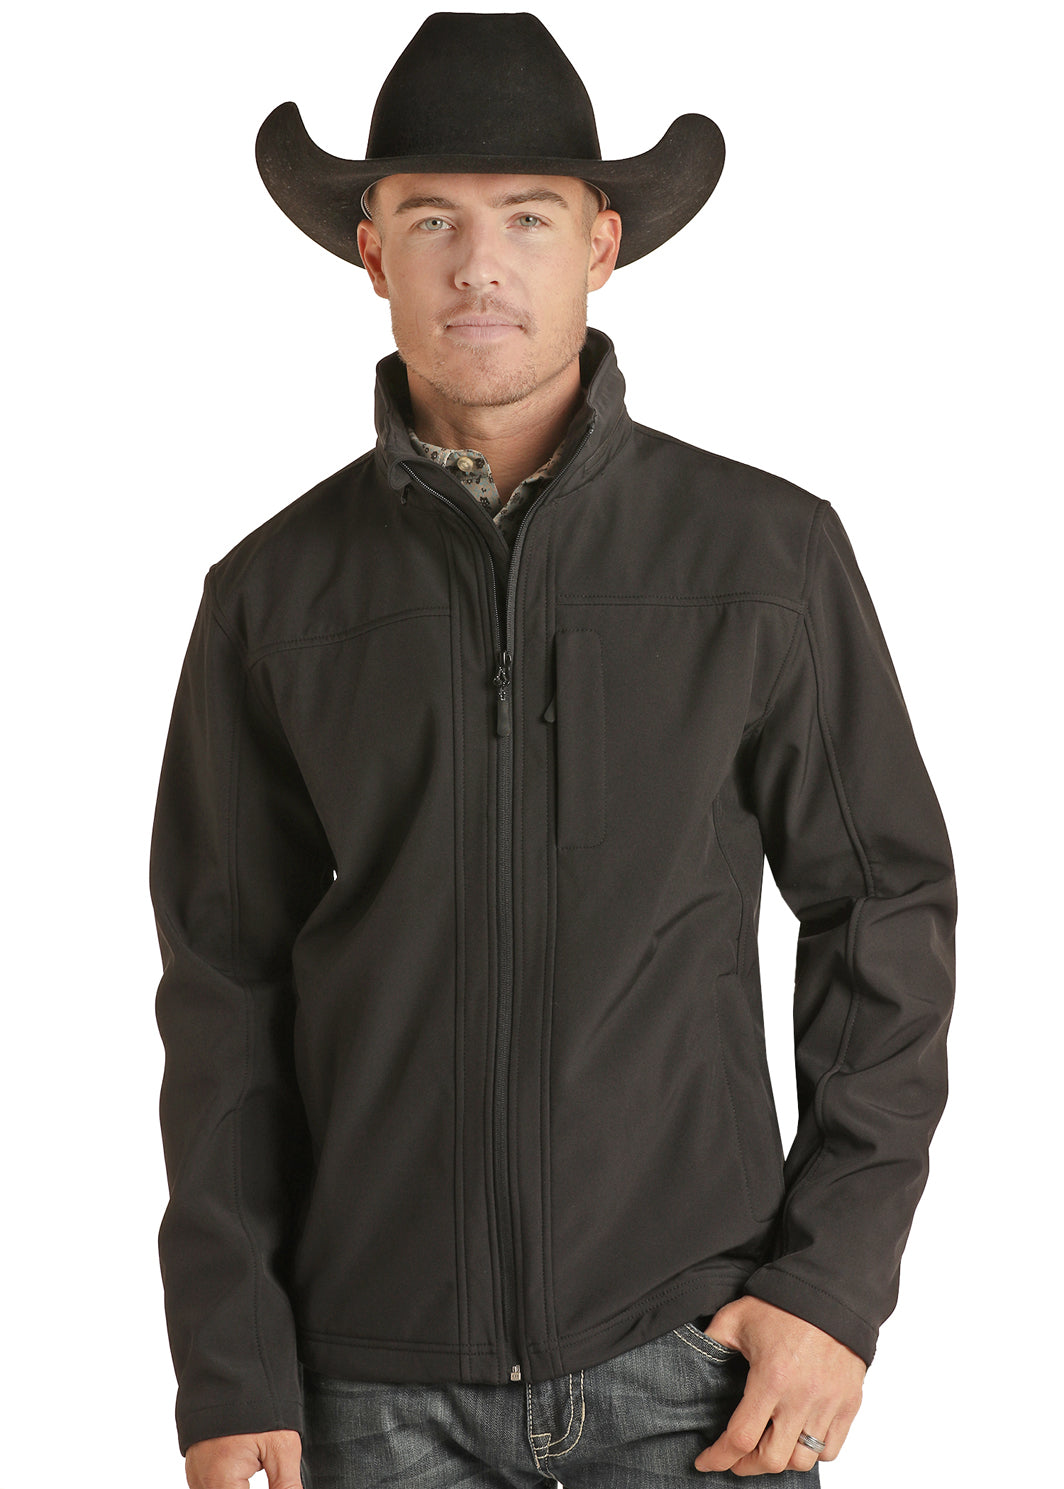 POWDER RIVER OUTFITTERS MEN'S SOLID SOFTSHELL JACKET - BLACK